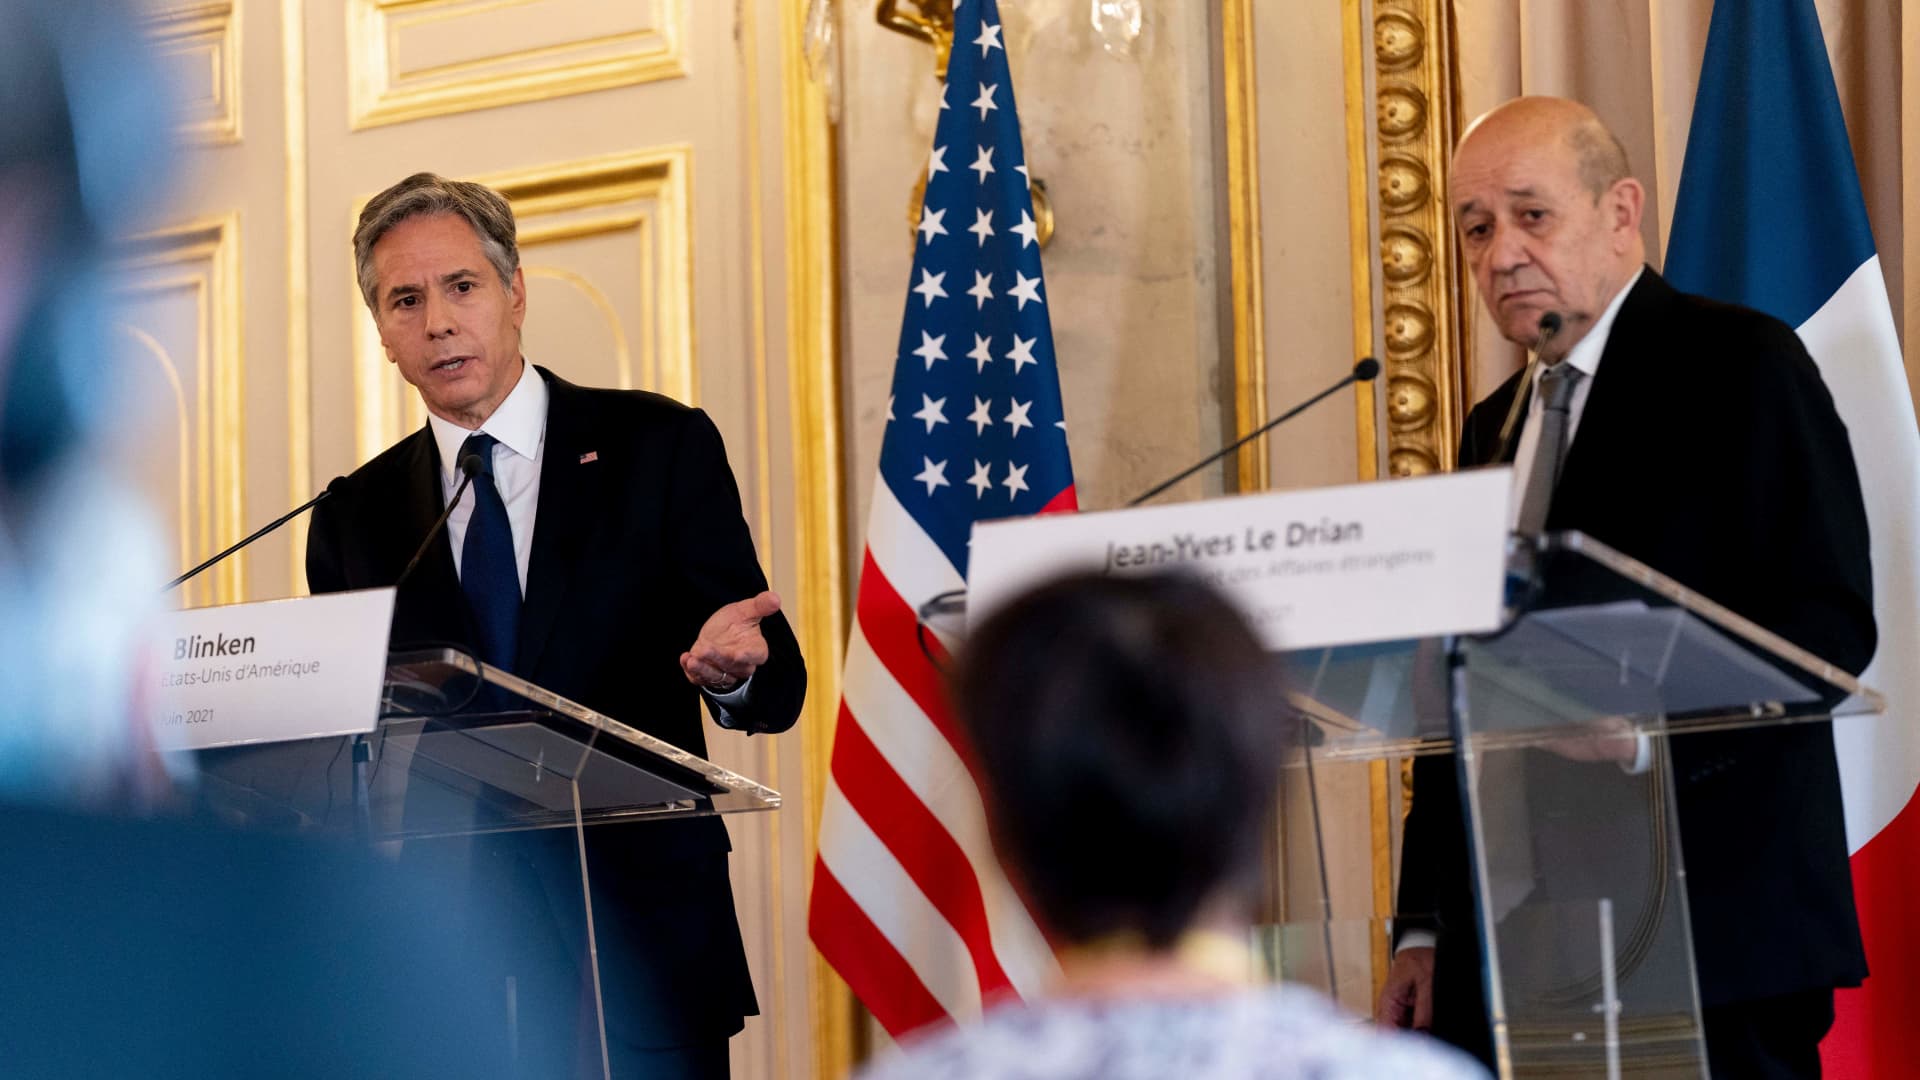 US Secretary of State Antony Blinken (L) and French Foreign Affairs Minister Jean-Yves Le Drian hold a joint press conference at the French Ministry of Foreign Affairs in Paris, on June 25, 2021.